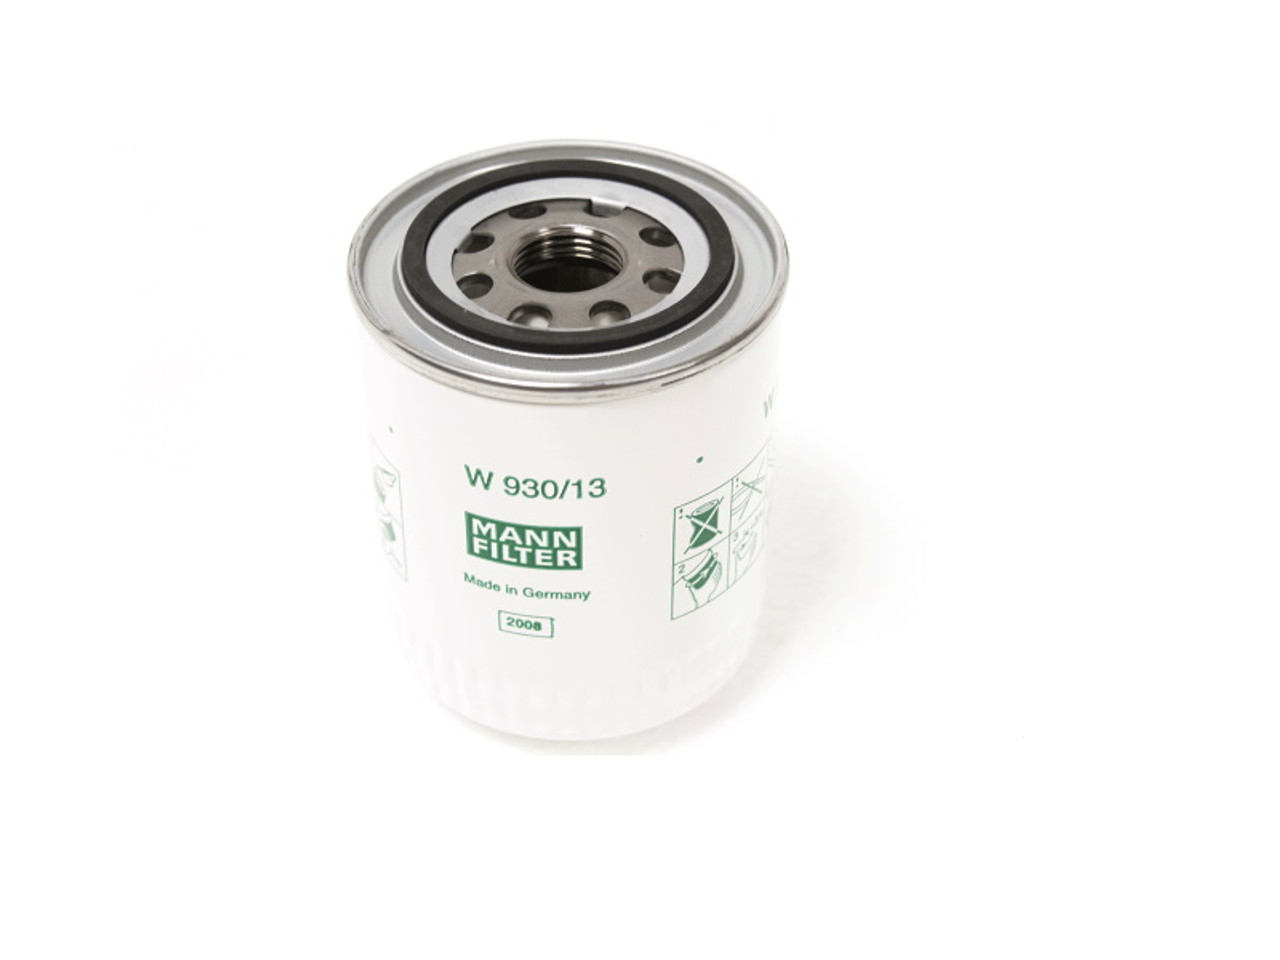 Mann and Hummel 2.9, 3.2, 3.6, 4.0, 5.3 and 6.0 Petrol Oil Filter - EBC9658